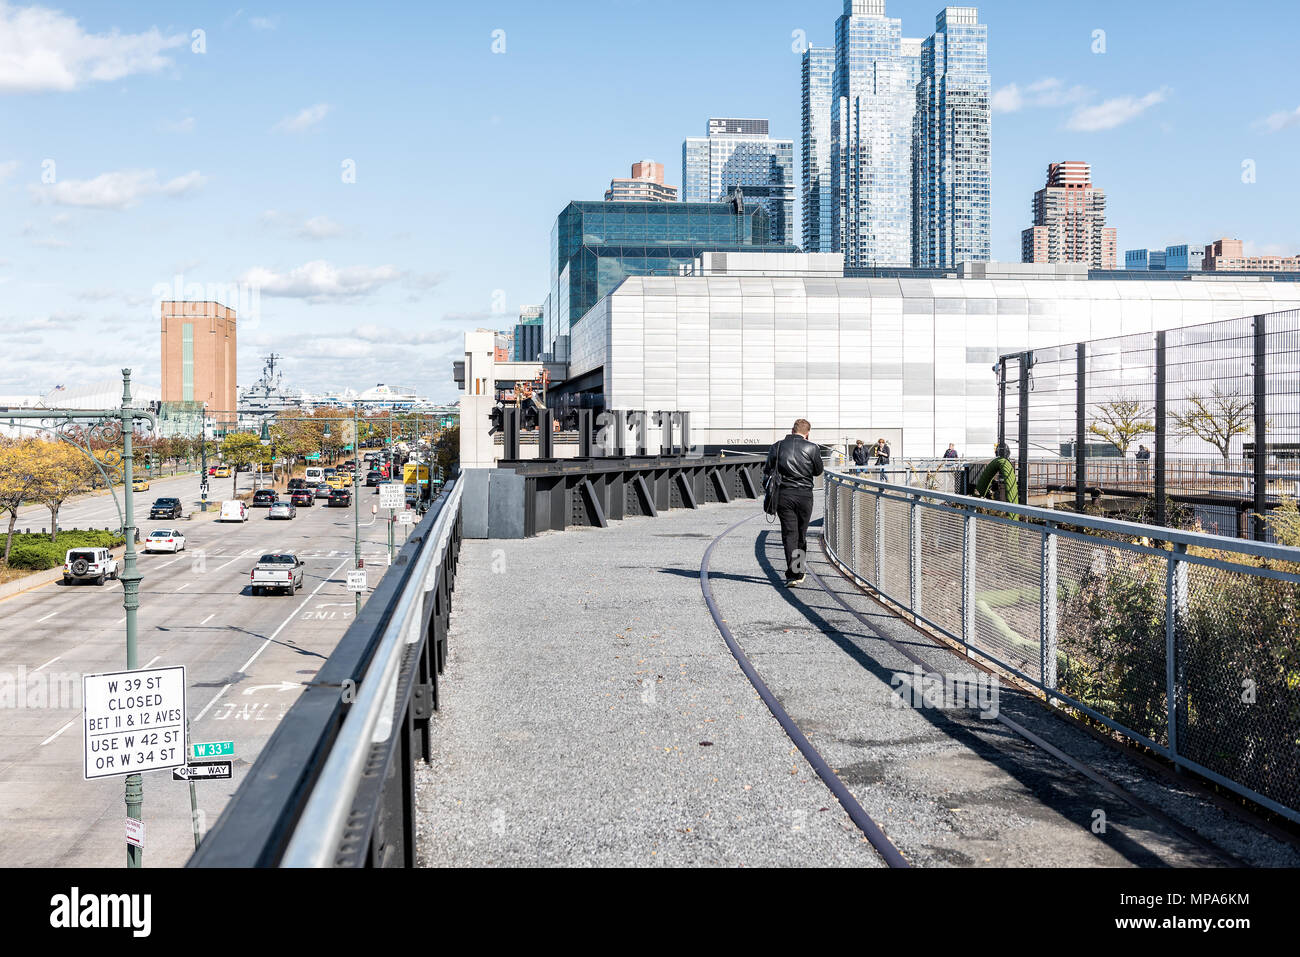 New York City, USA - October 30, 2017: Highline, high line, urban in NYC with people tourists walking in Chelsea West Side by Hudson Yards in autumn f Stock Photo